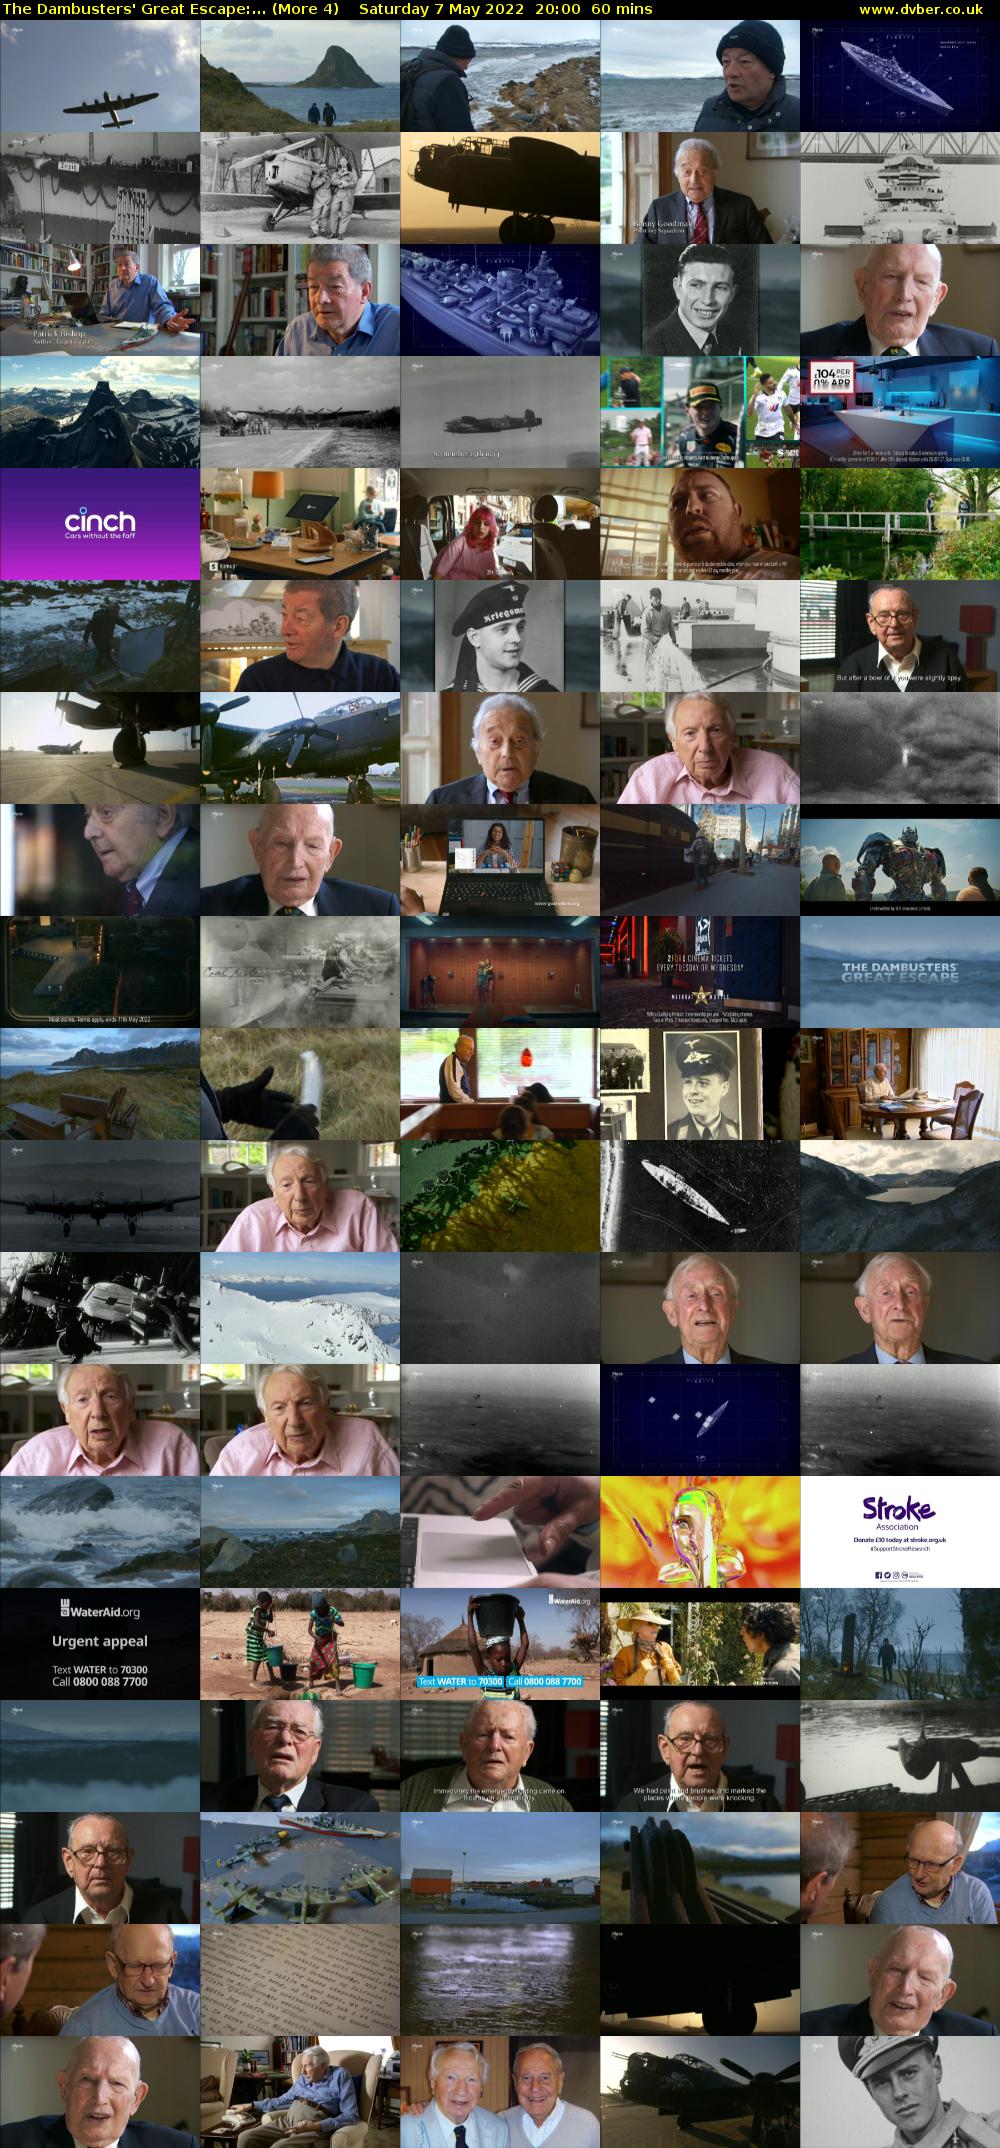 The Dambusters' Great Escape:... (More 4) Saturday 7 May 2022 20:00 - 21:00